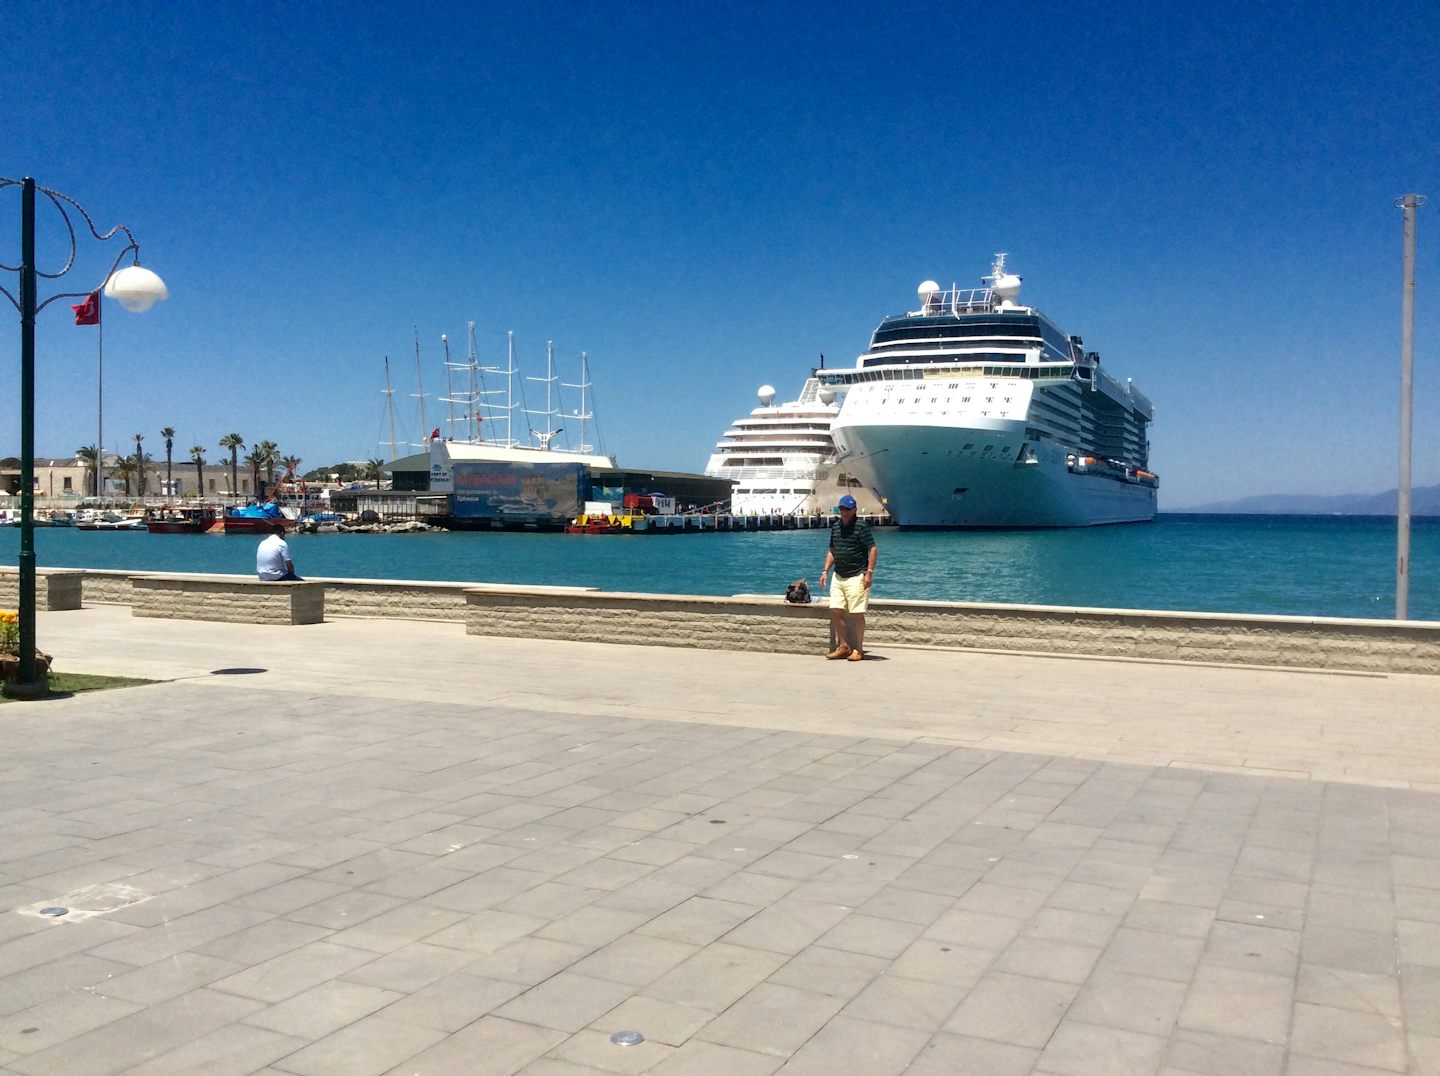 Berthed next to Silver sea in Turkey